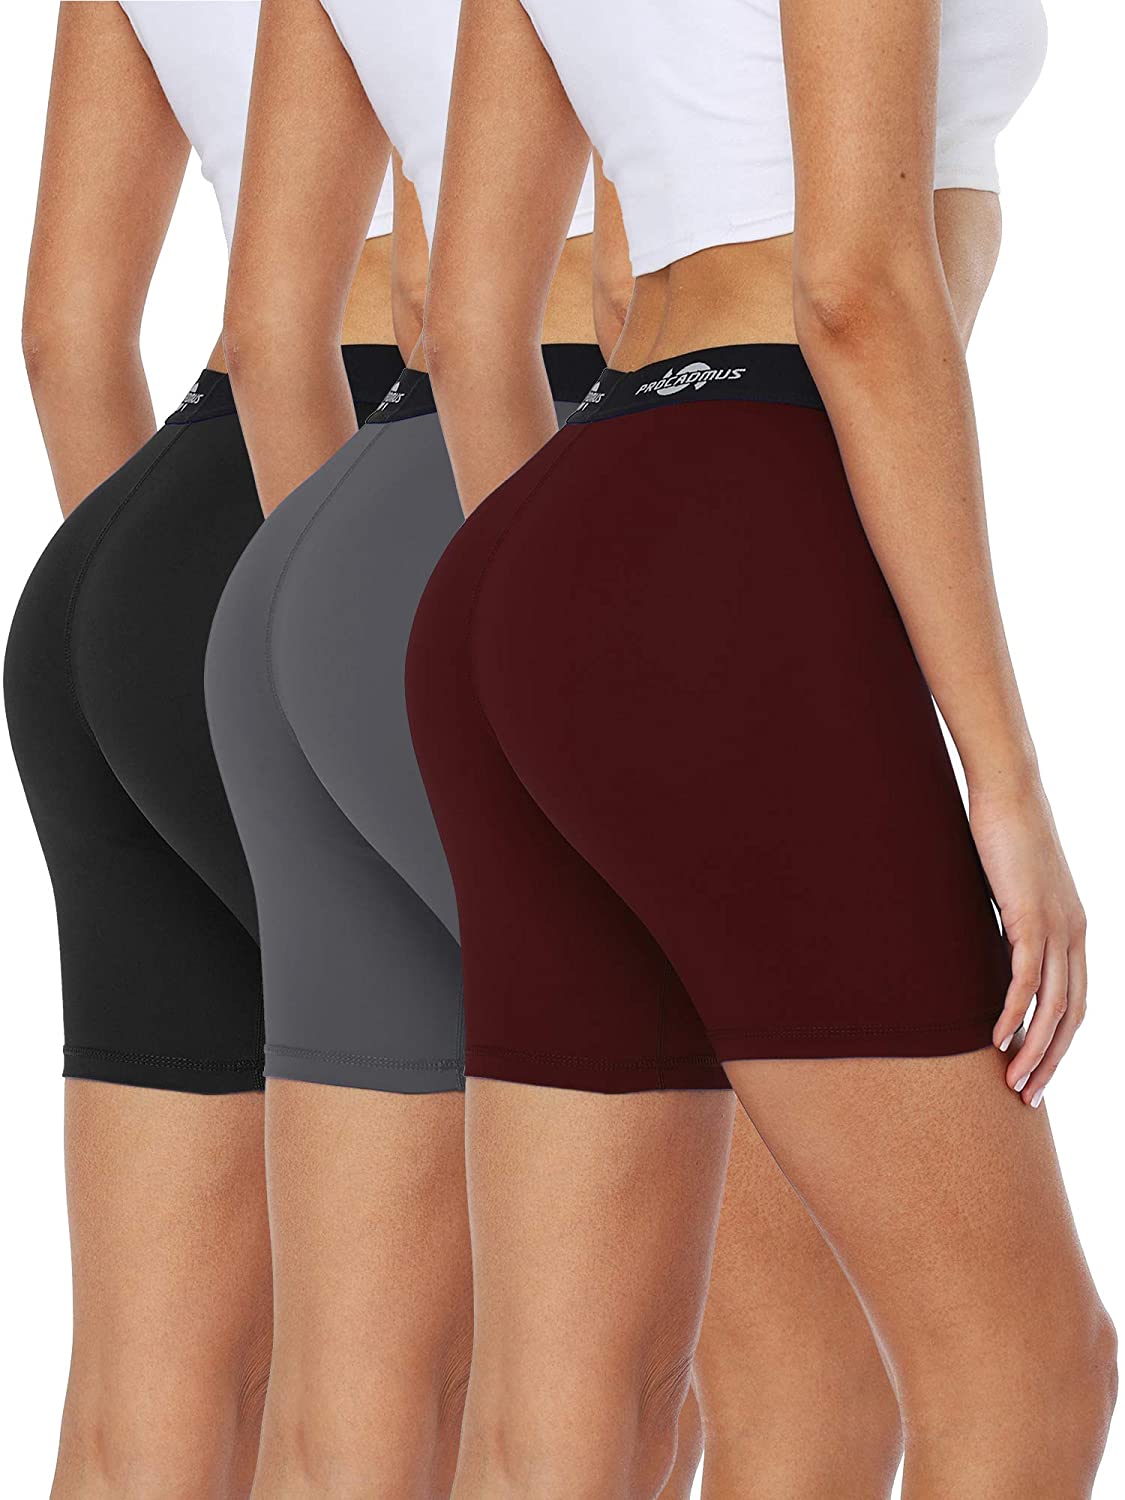 CADMUS Women's Spandex Volleyball Shorts 3 Workout Pro Shorts.